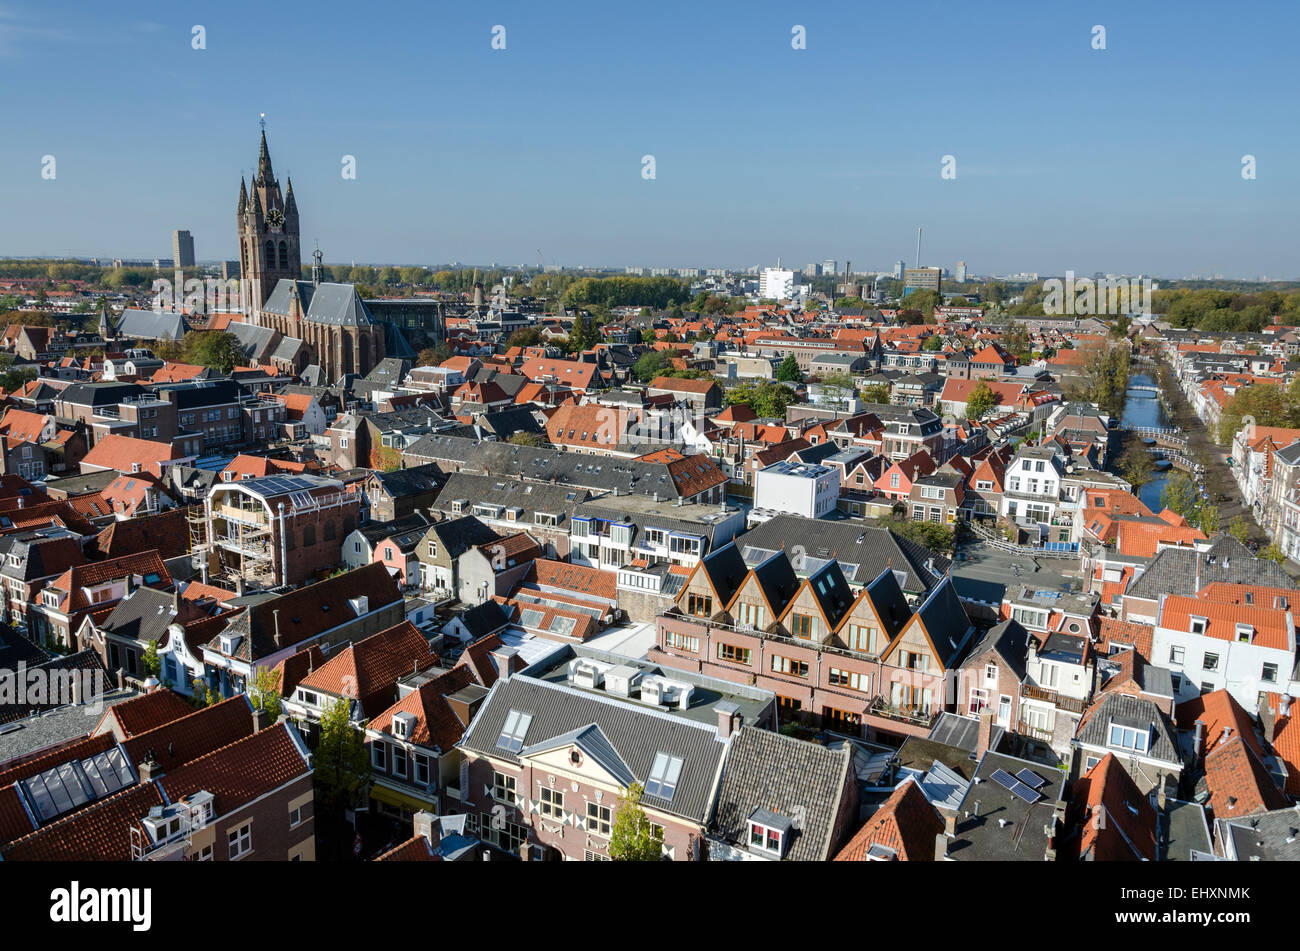 A view across the Dutch city of Delft from the Nieuwe Kerk tower. Stock Photo